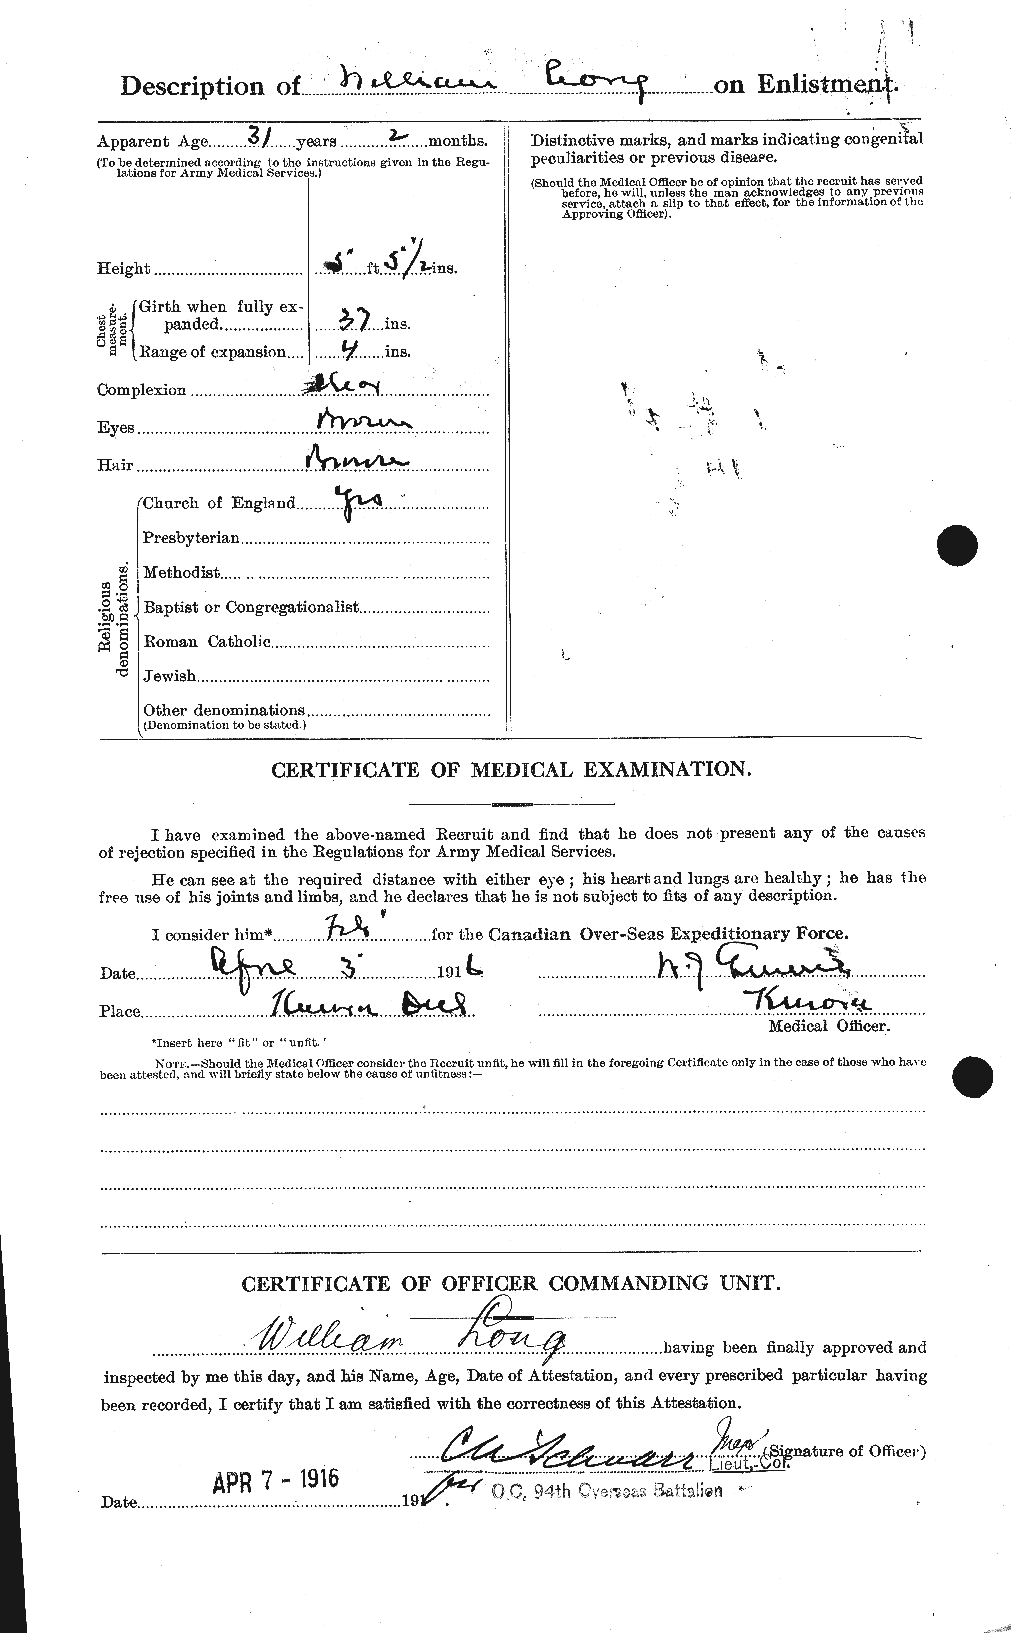 Personnel Records of the First World War - CEF 058077b